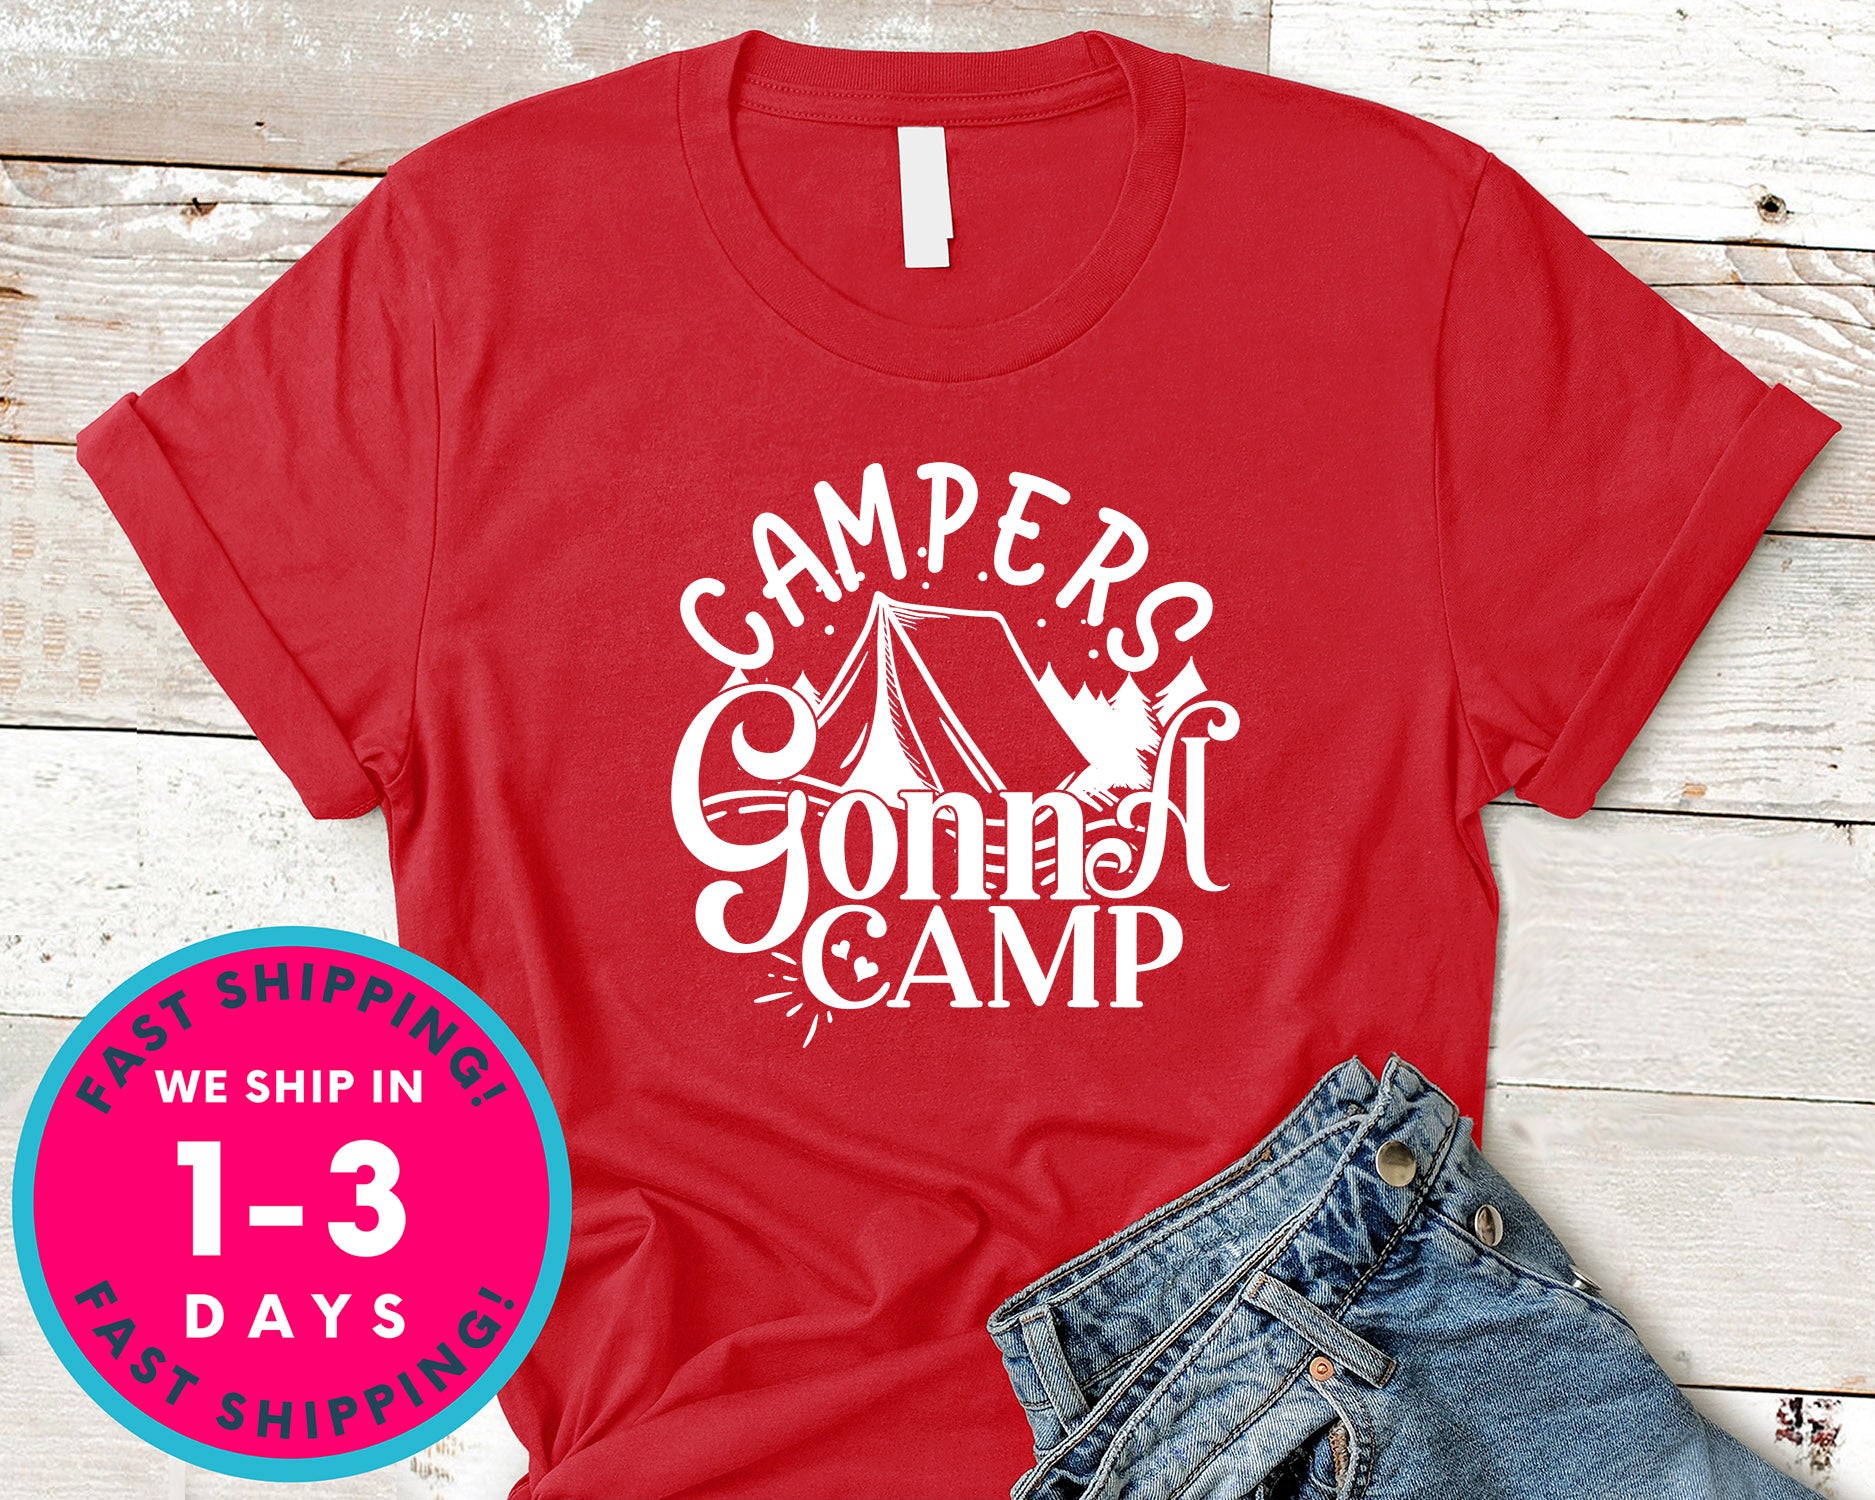 Campers Gonna Camp